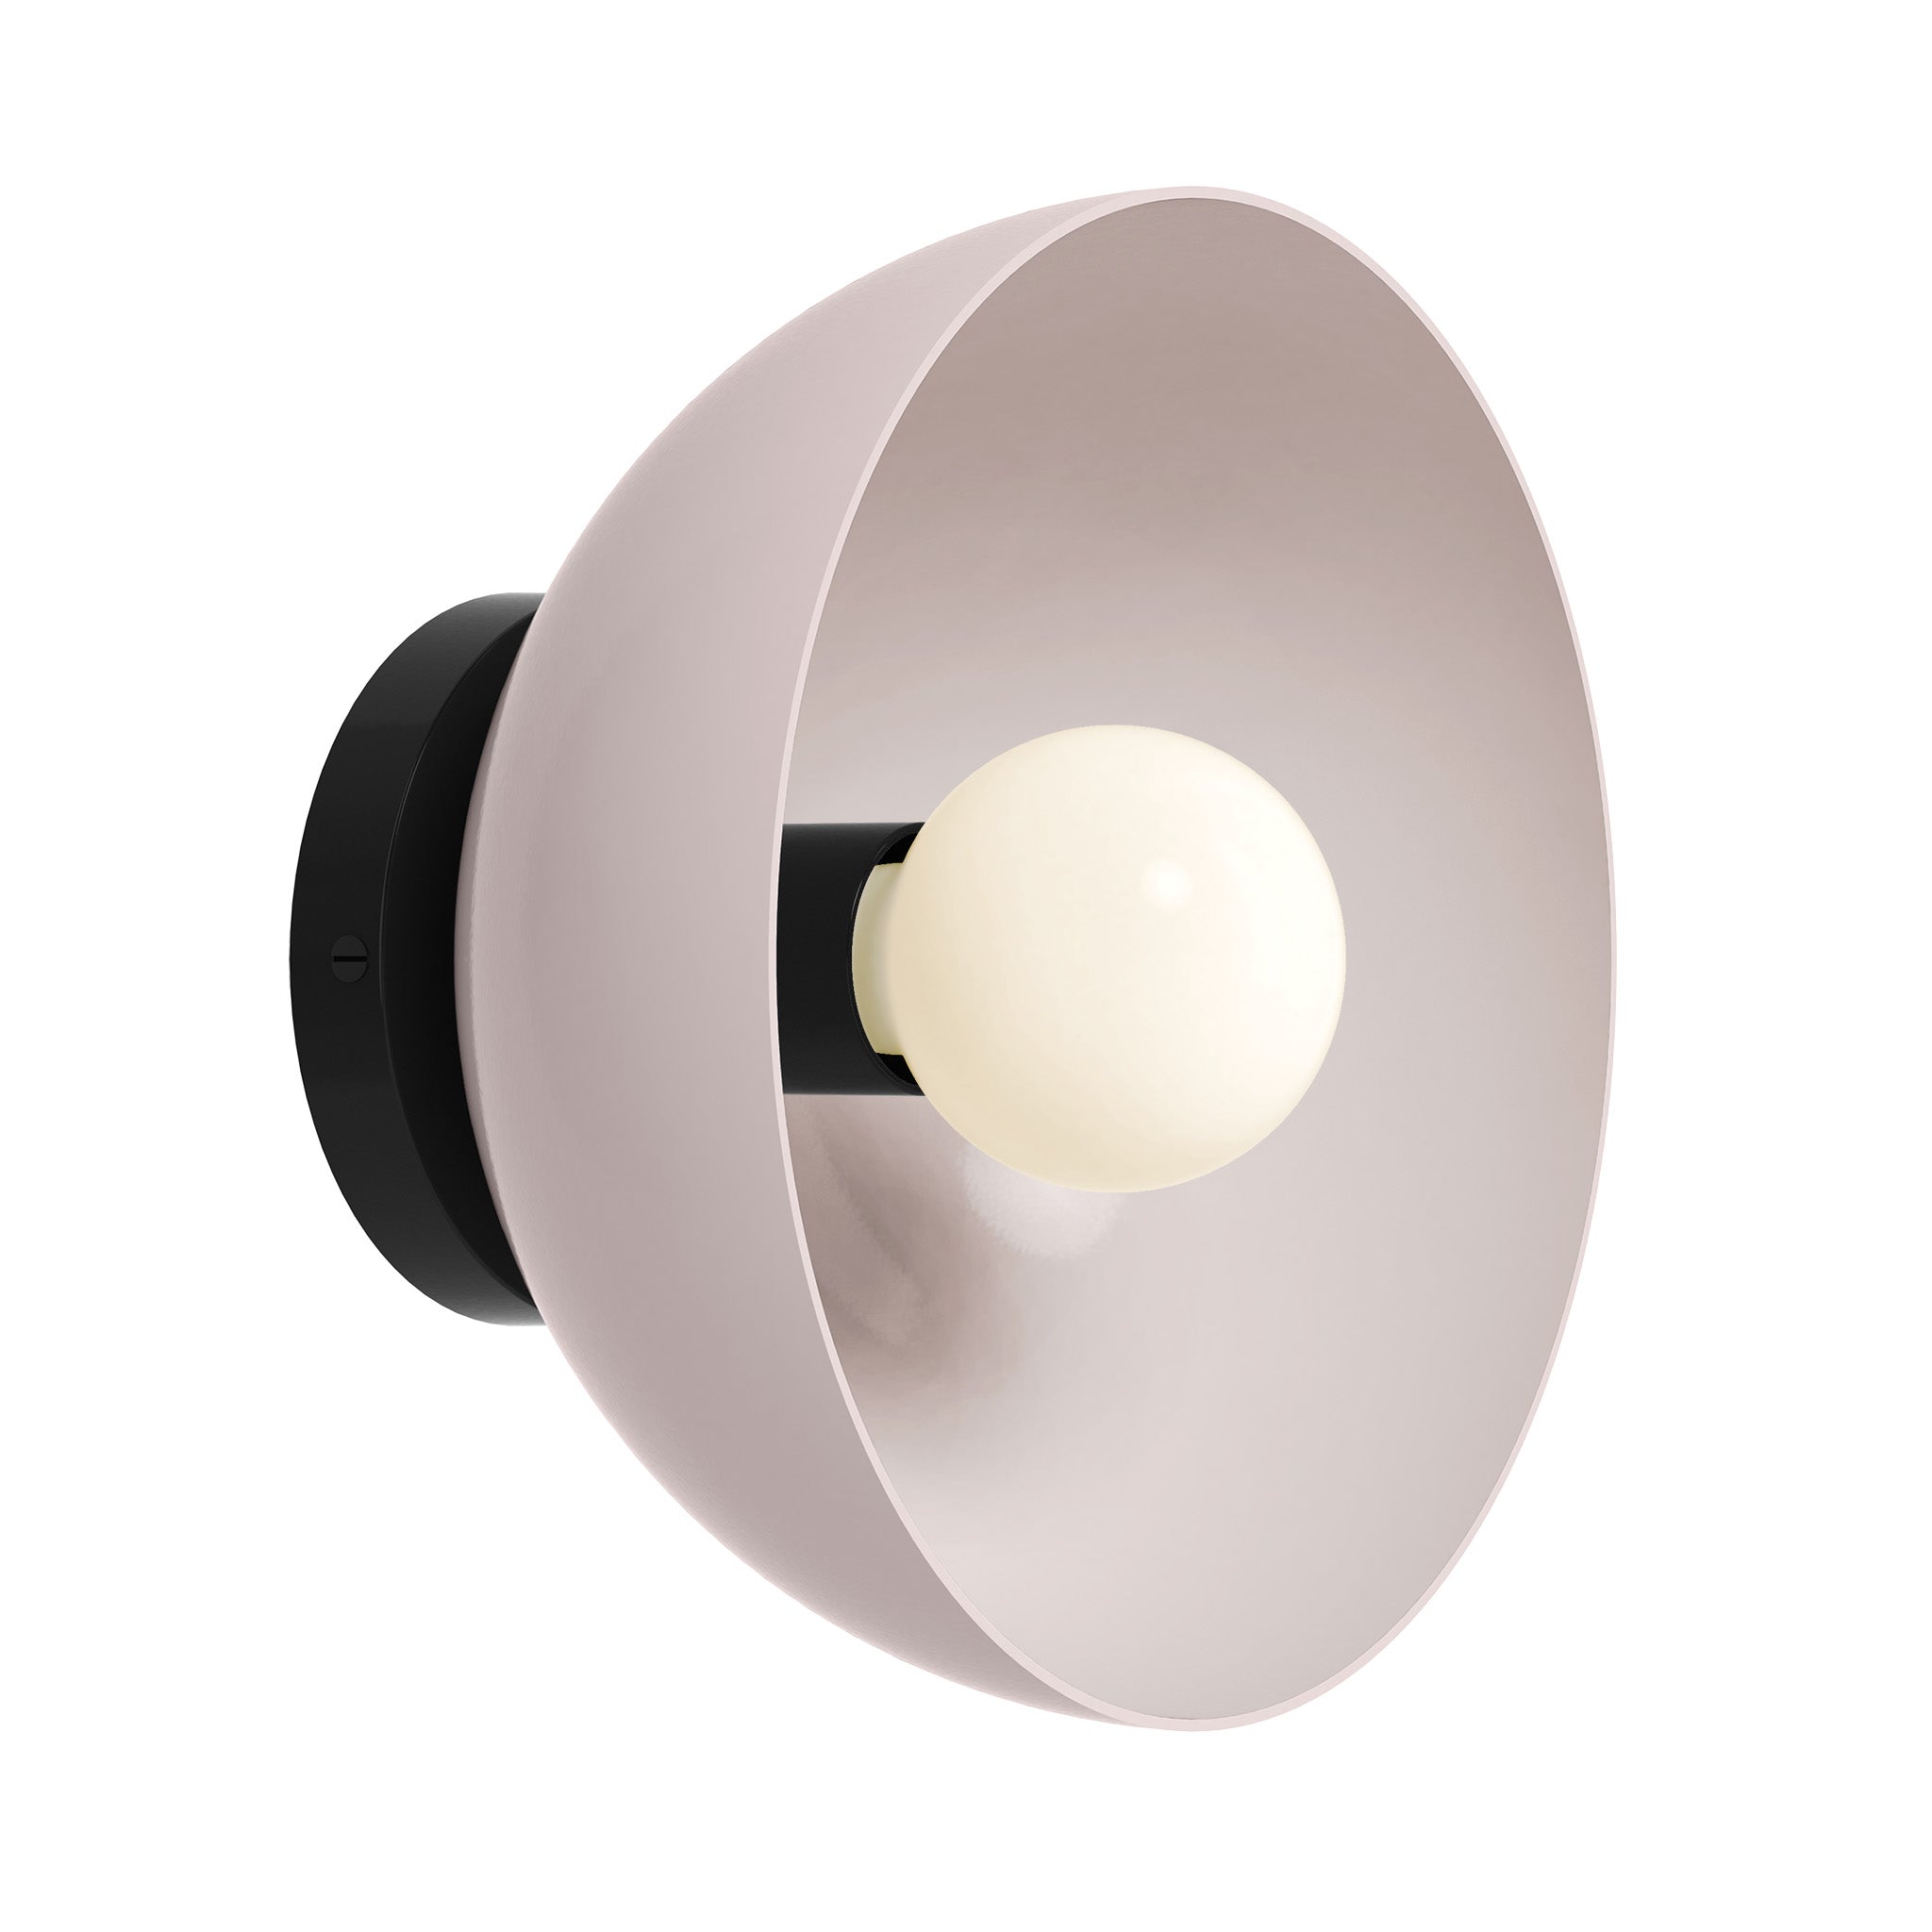 Black and barely color hemi dome sconce 10" Dutton Brown lighting